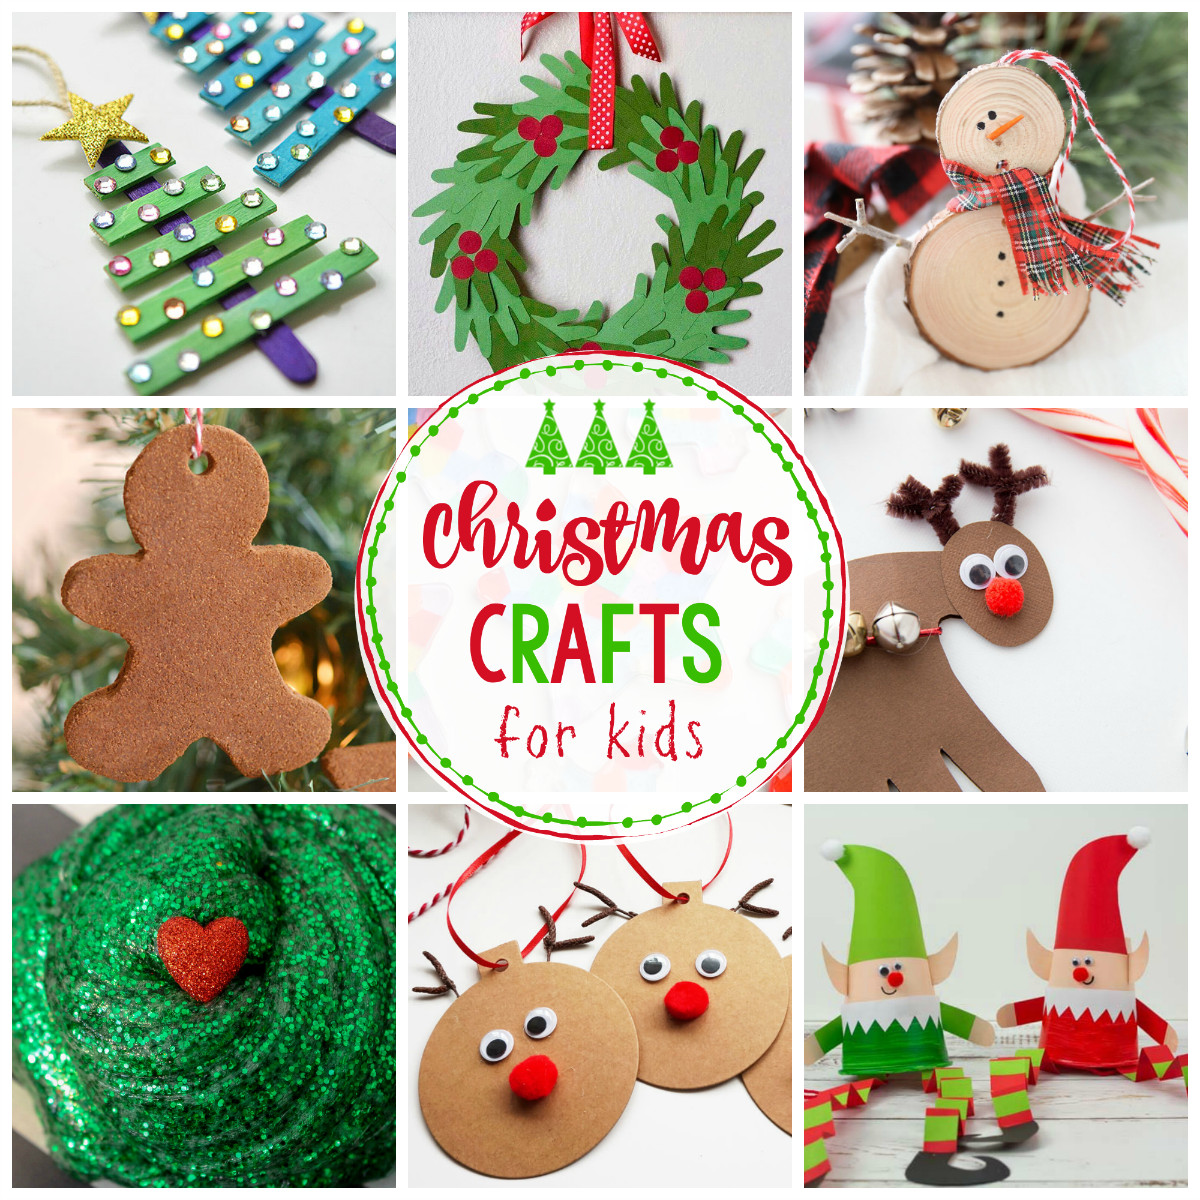 Preschool Christmas Ornament Craft Ideas
 25 Easy Christmas Crafts for Kids Crazy Little Projects